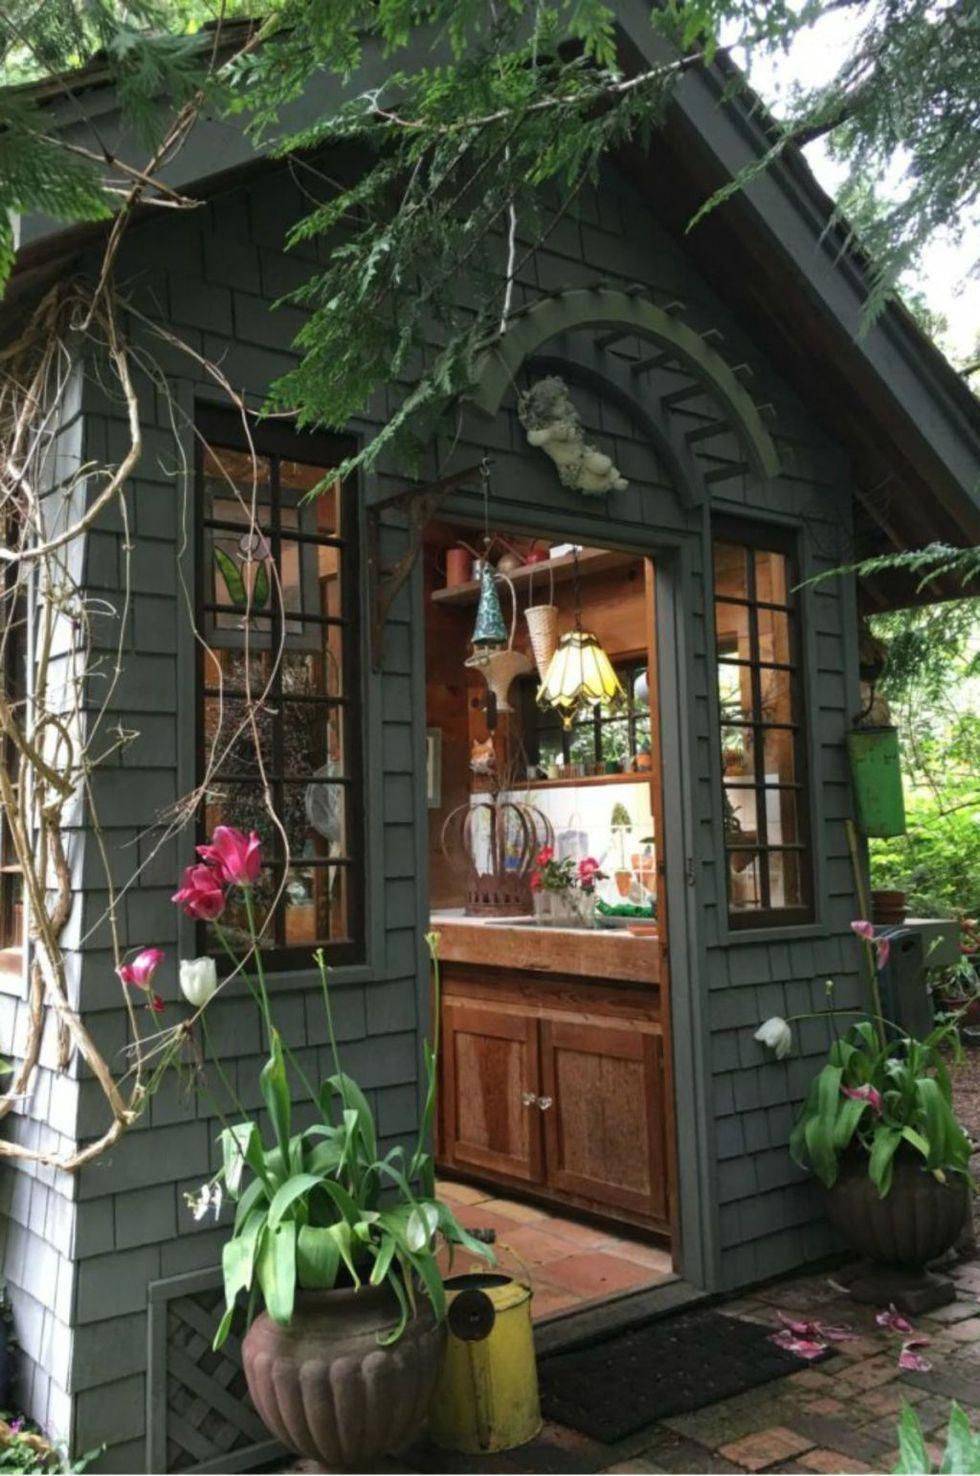 Wonderful Whimsical Garden Ideas Garden Tool Shed Tool Sheds Shed